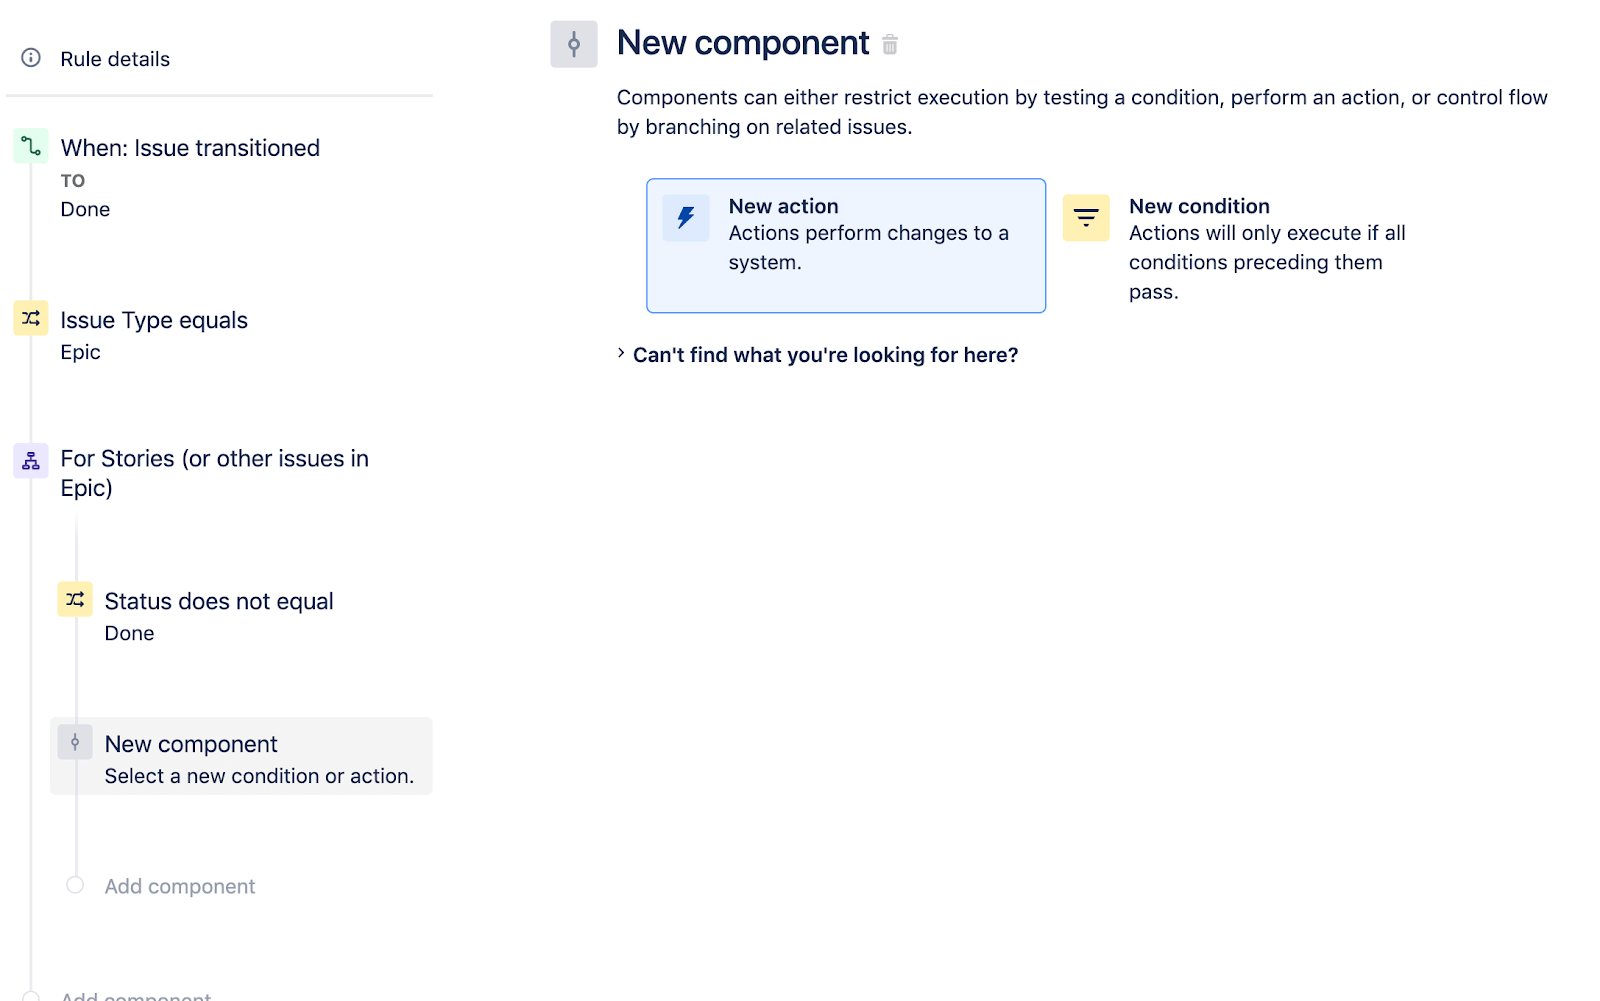 Selecting new action as a new component in Jira Software